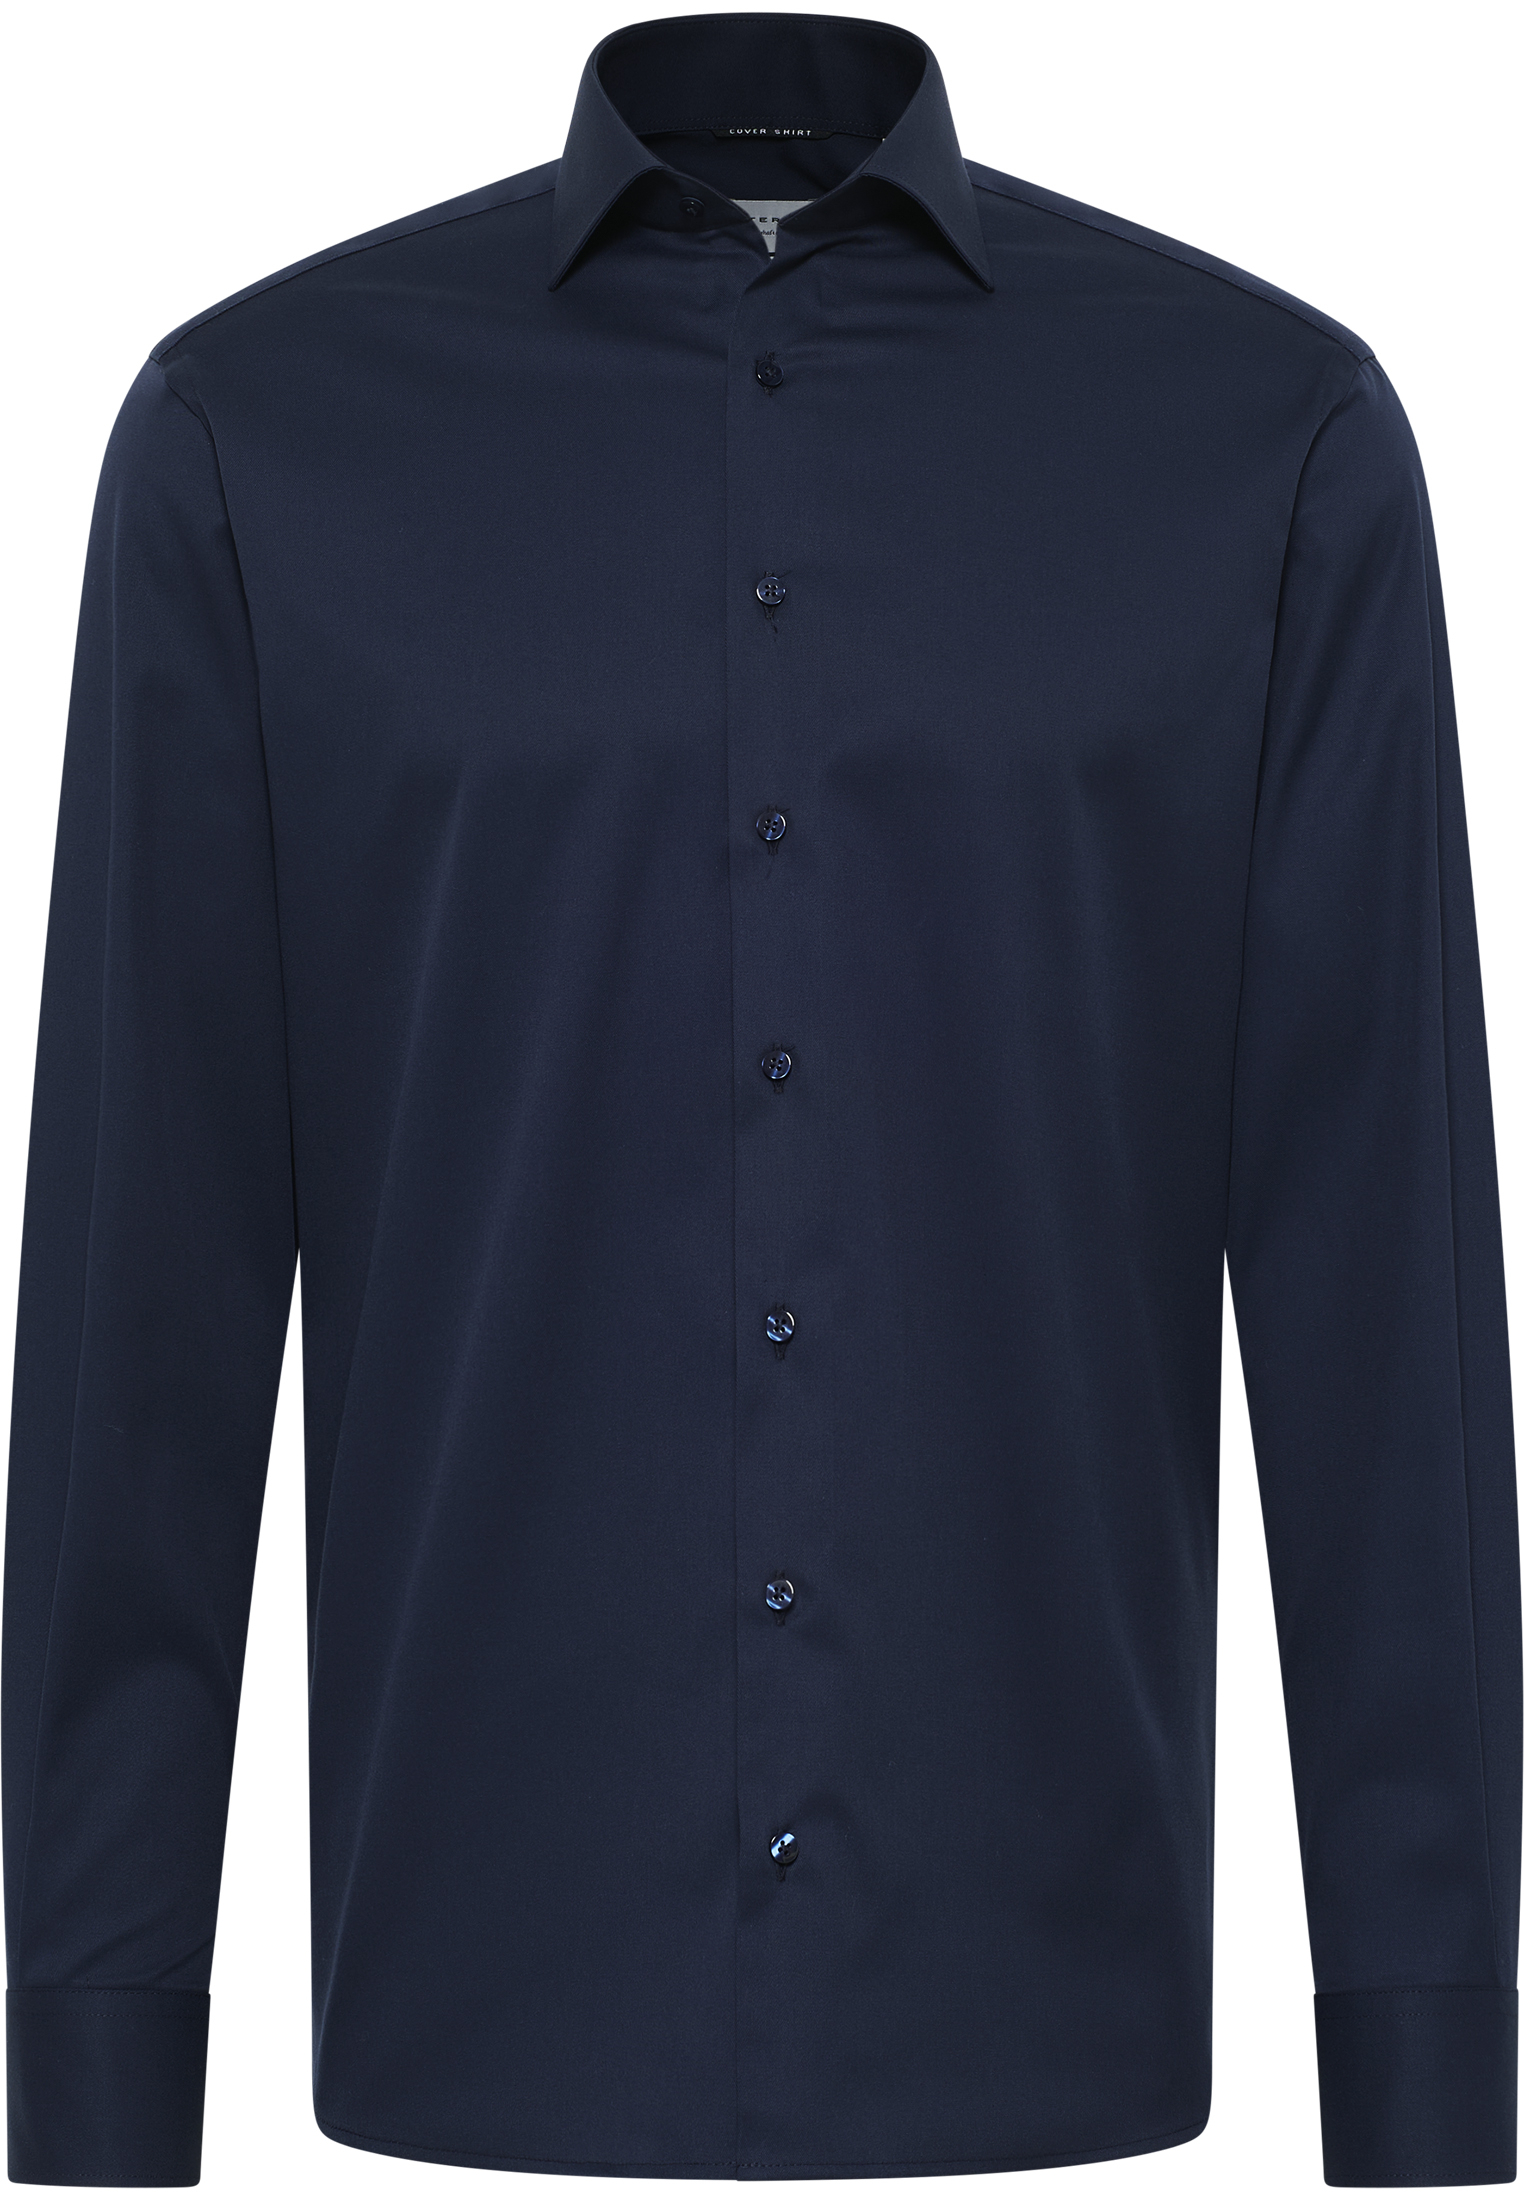 MODERN FIT Cover Shirt in navy unifarben